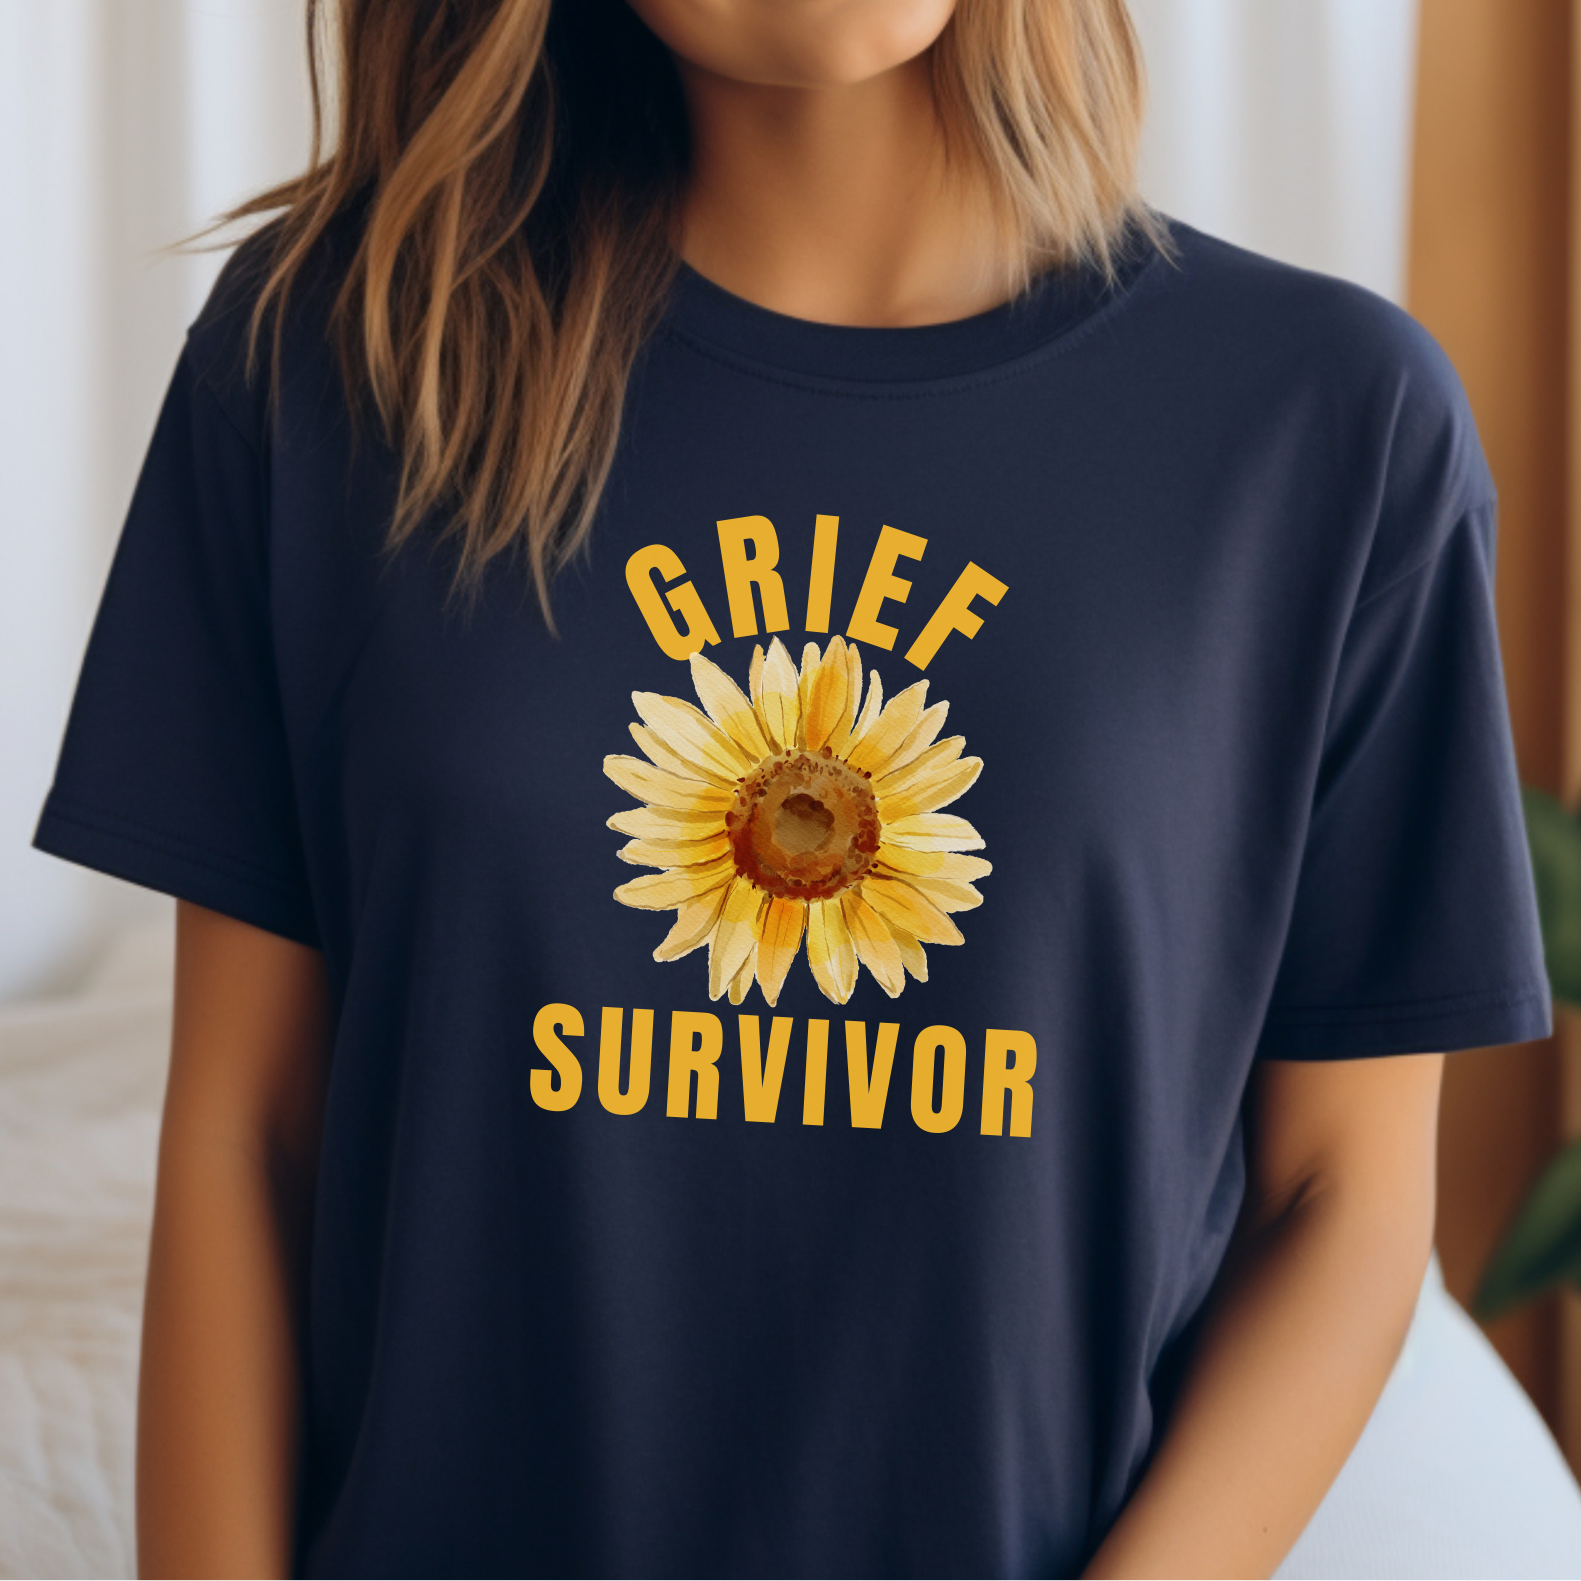 Navy Bella Canvas 3001 tee. This t-shirt showcases a simple sunflower design paired with the message Grief Survivor, serving as a symbol of endurance and healing